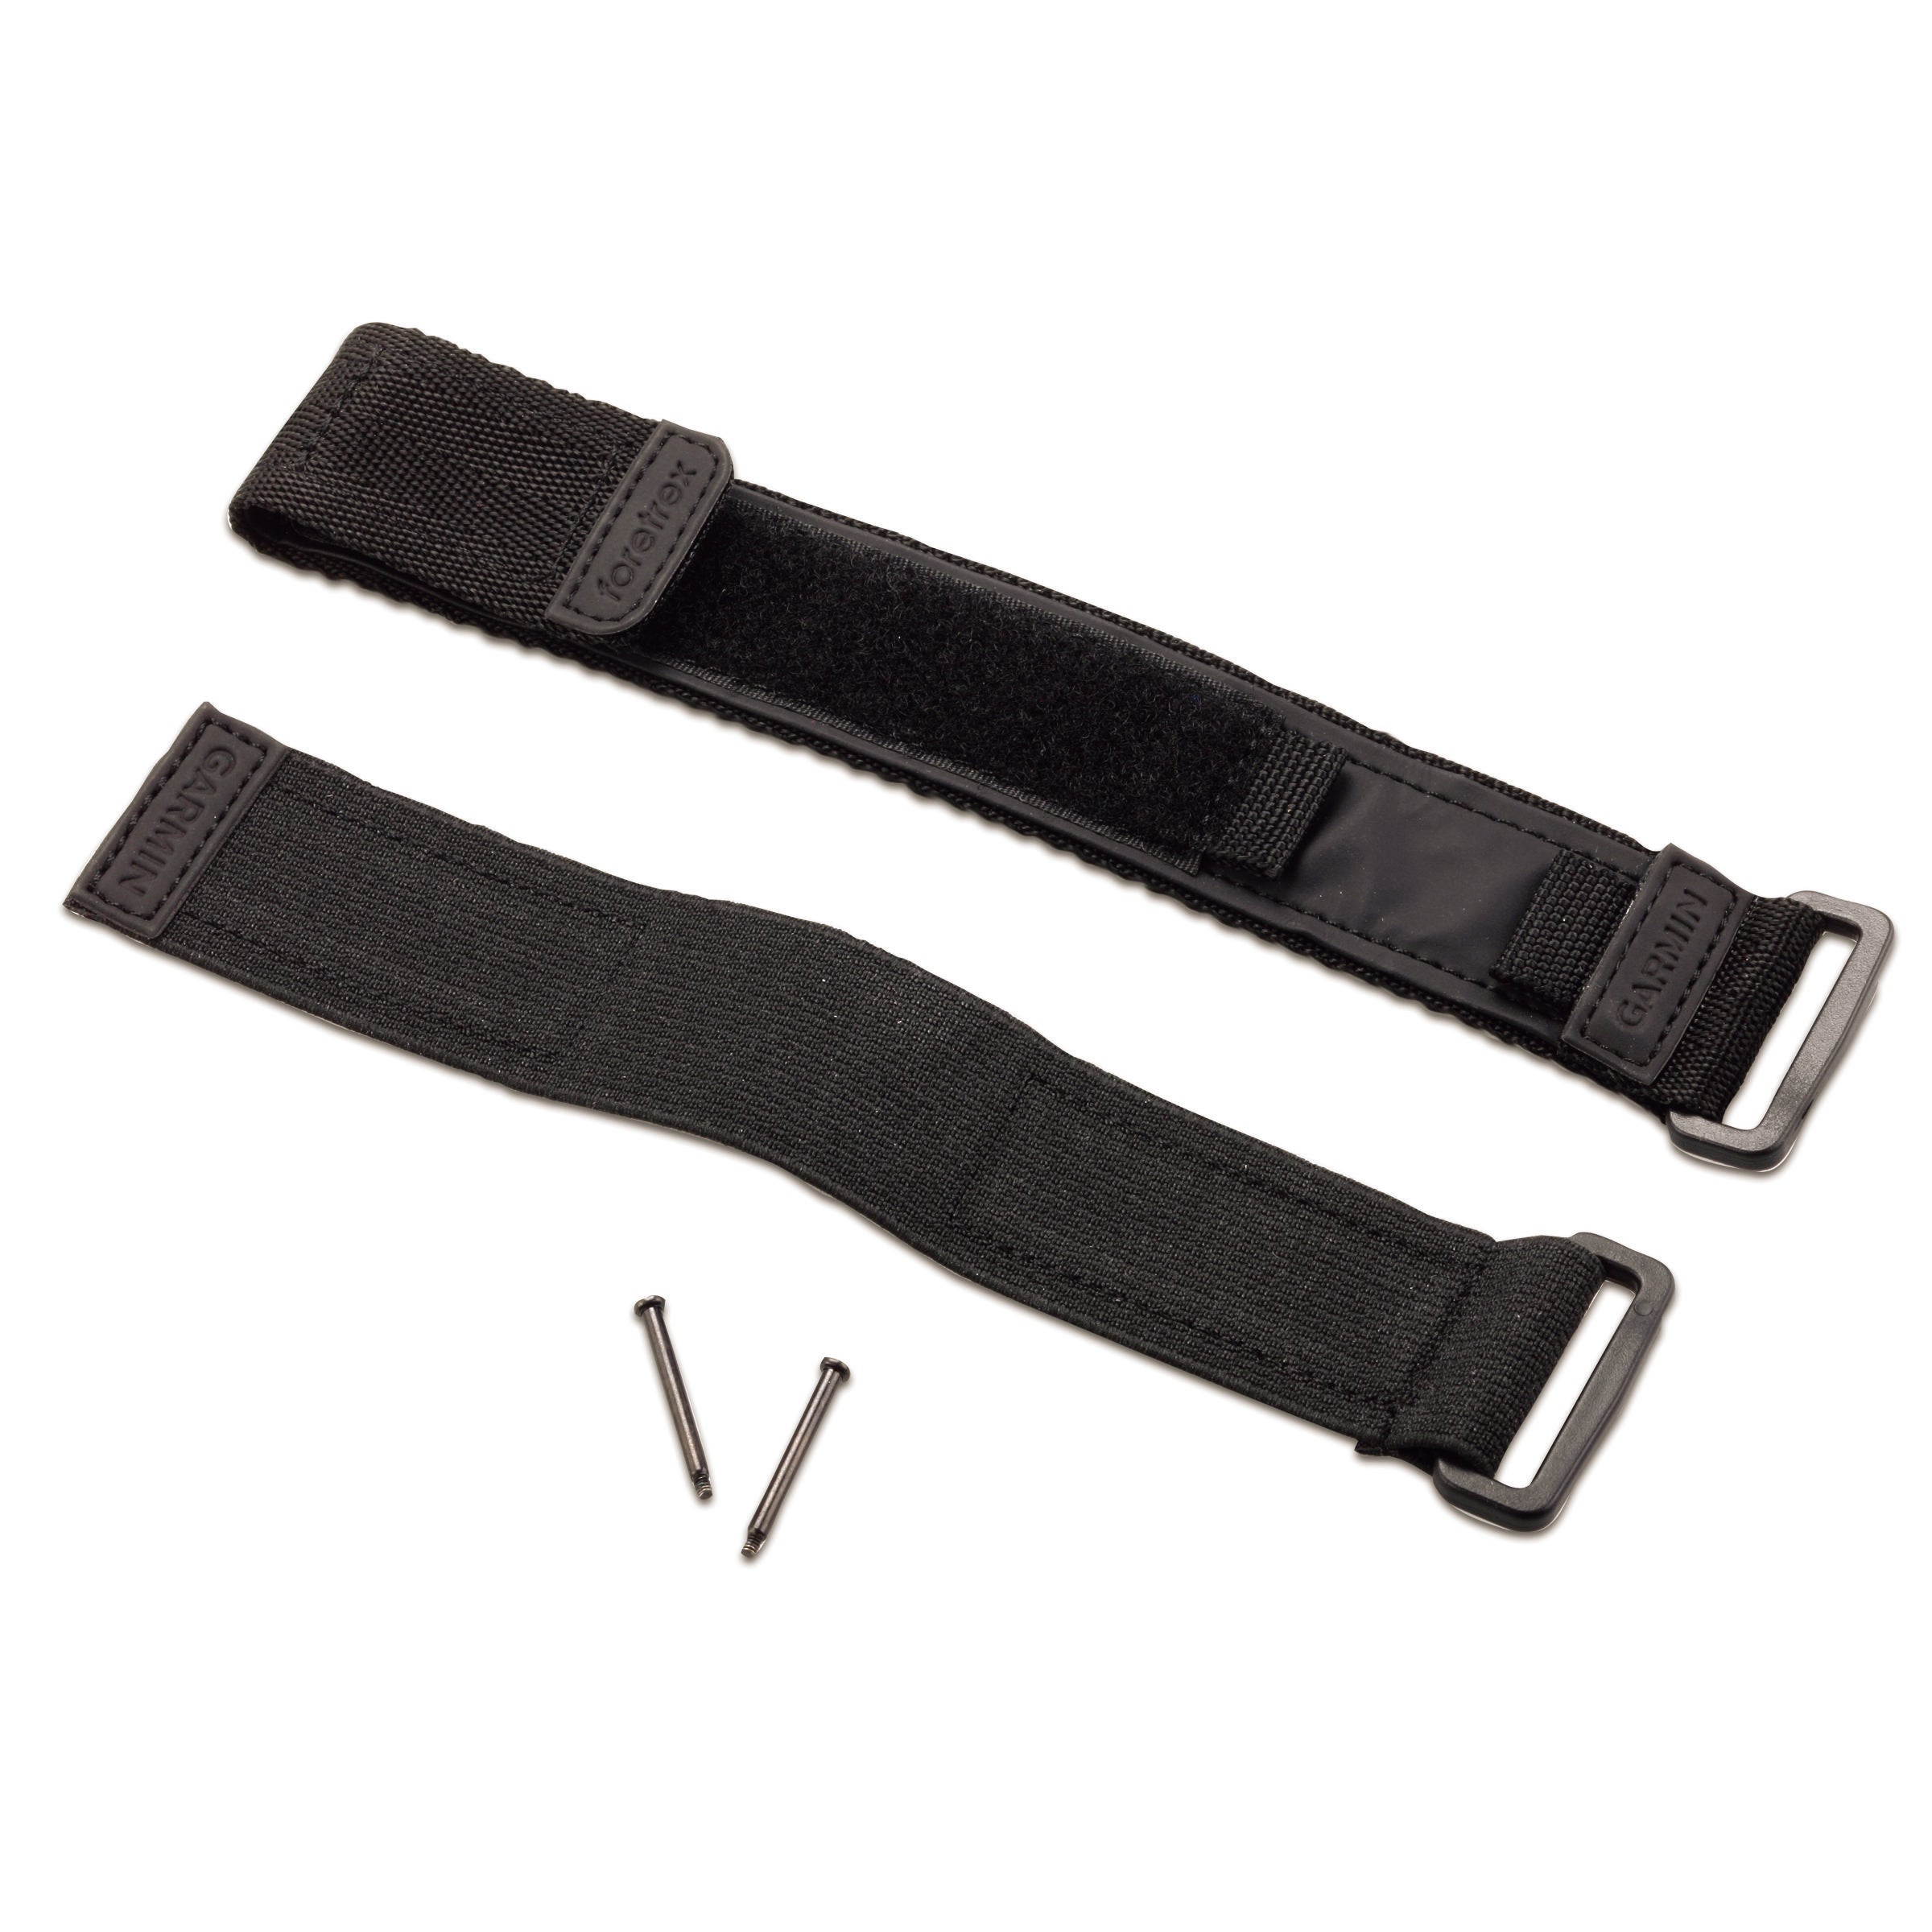 Garmin Strap with hook and loop